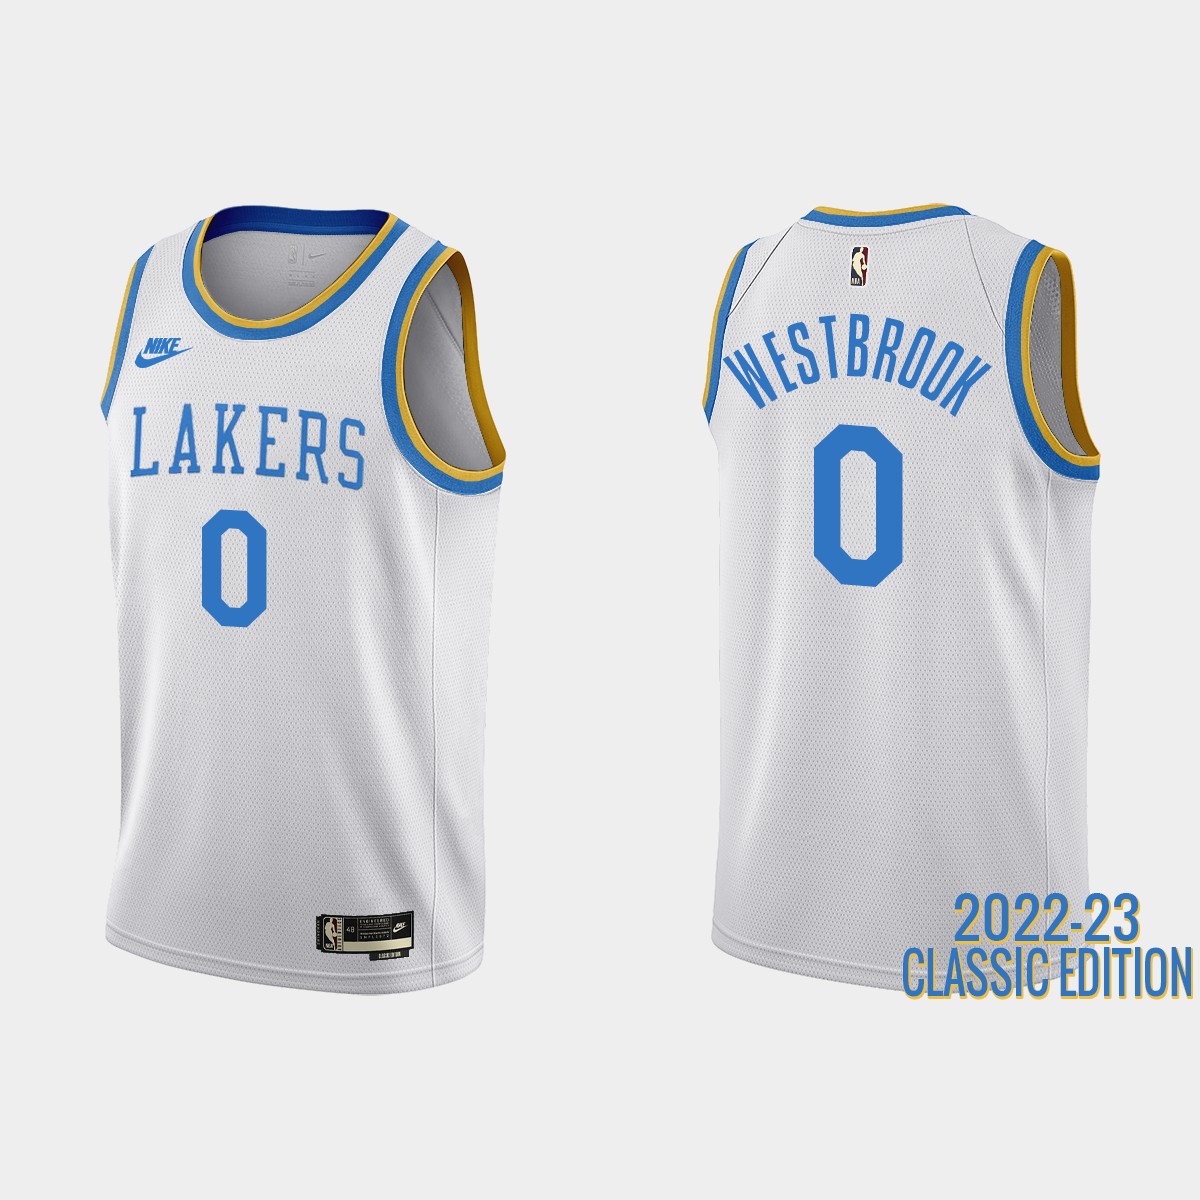 Russell Westbrook 0 Los Angeles Lakers 2022-23 Classic Edition White Jersey